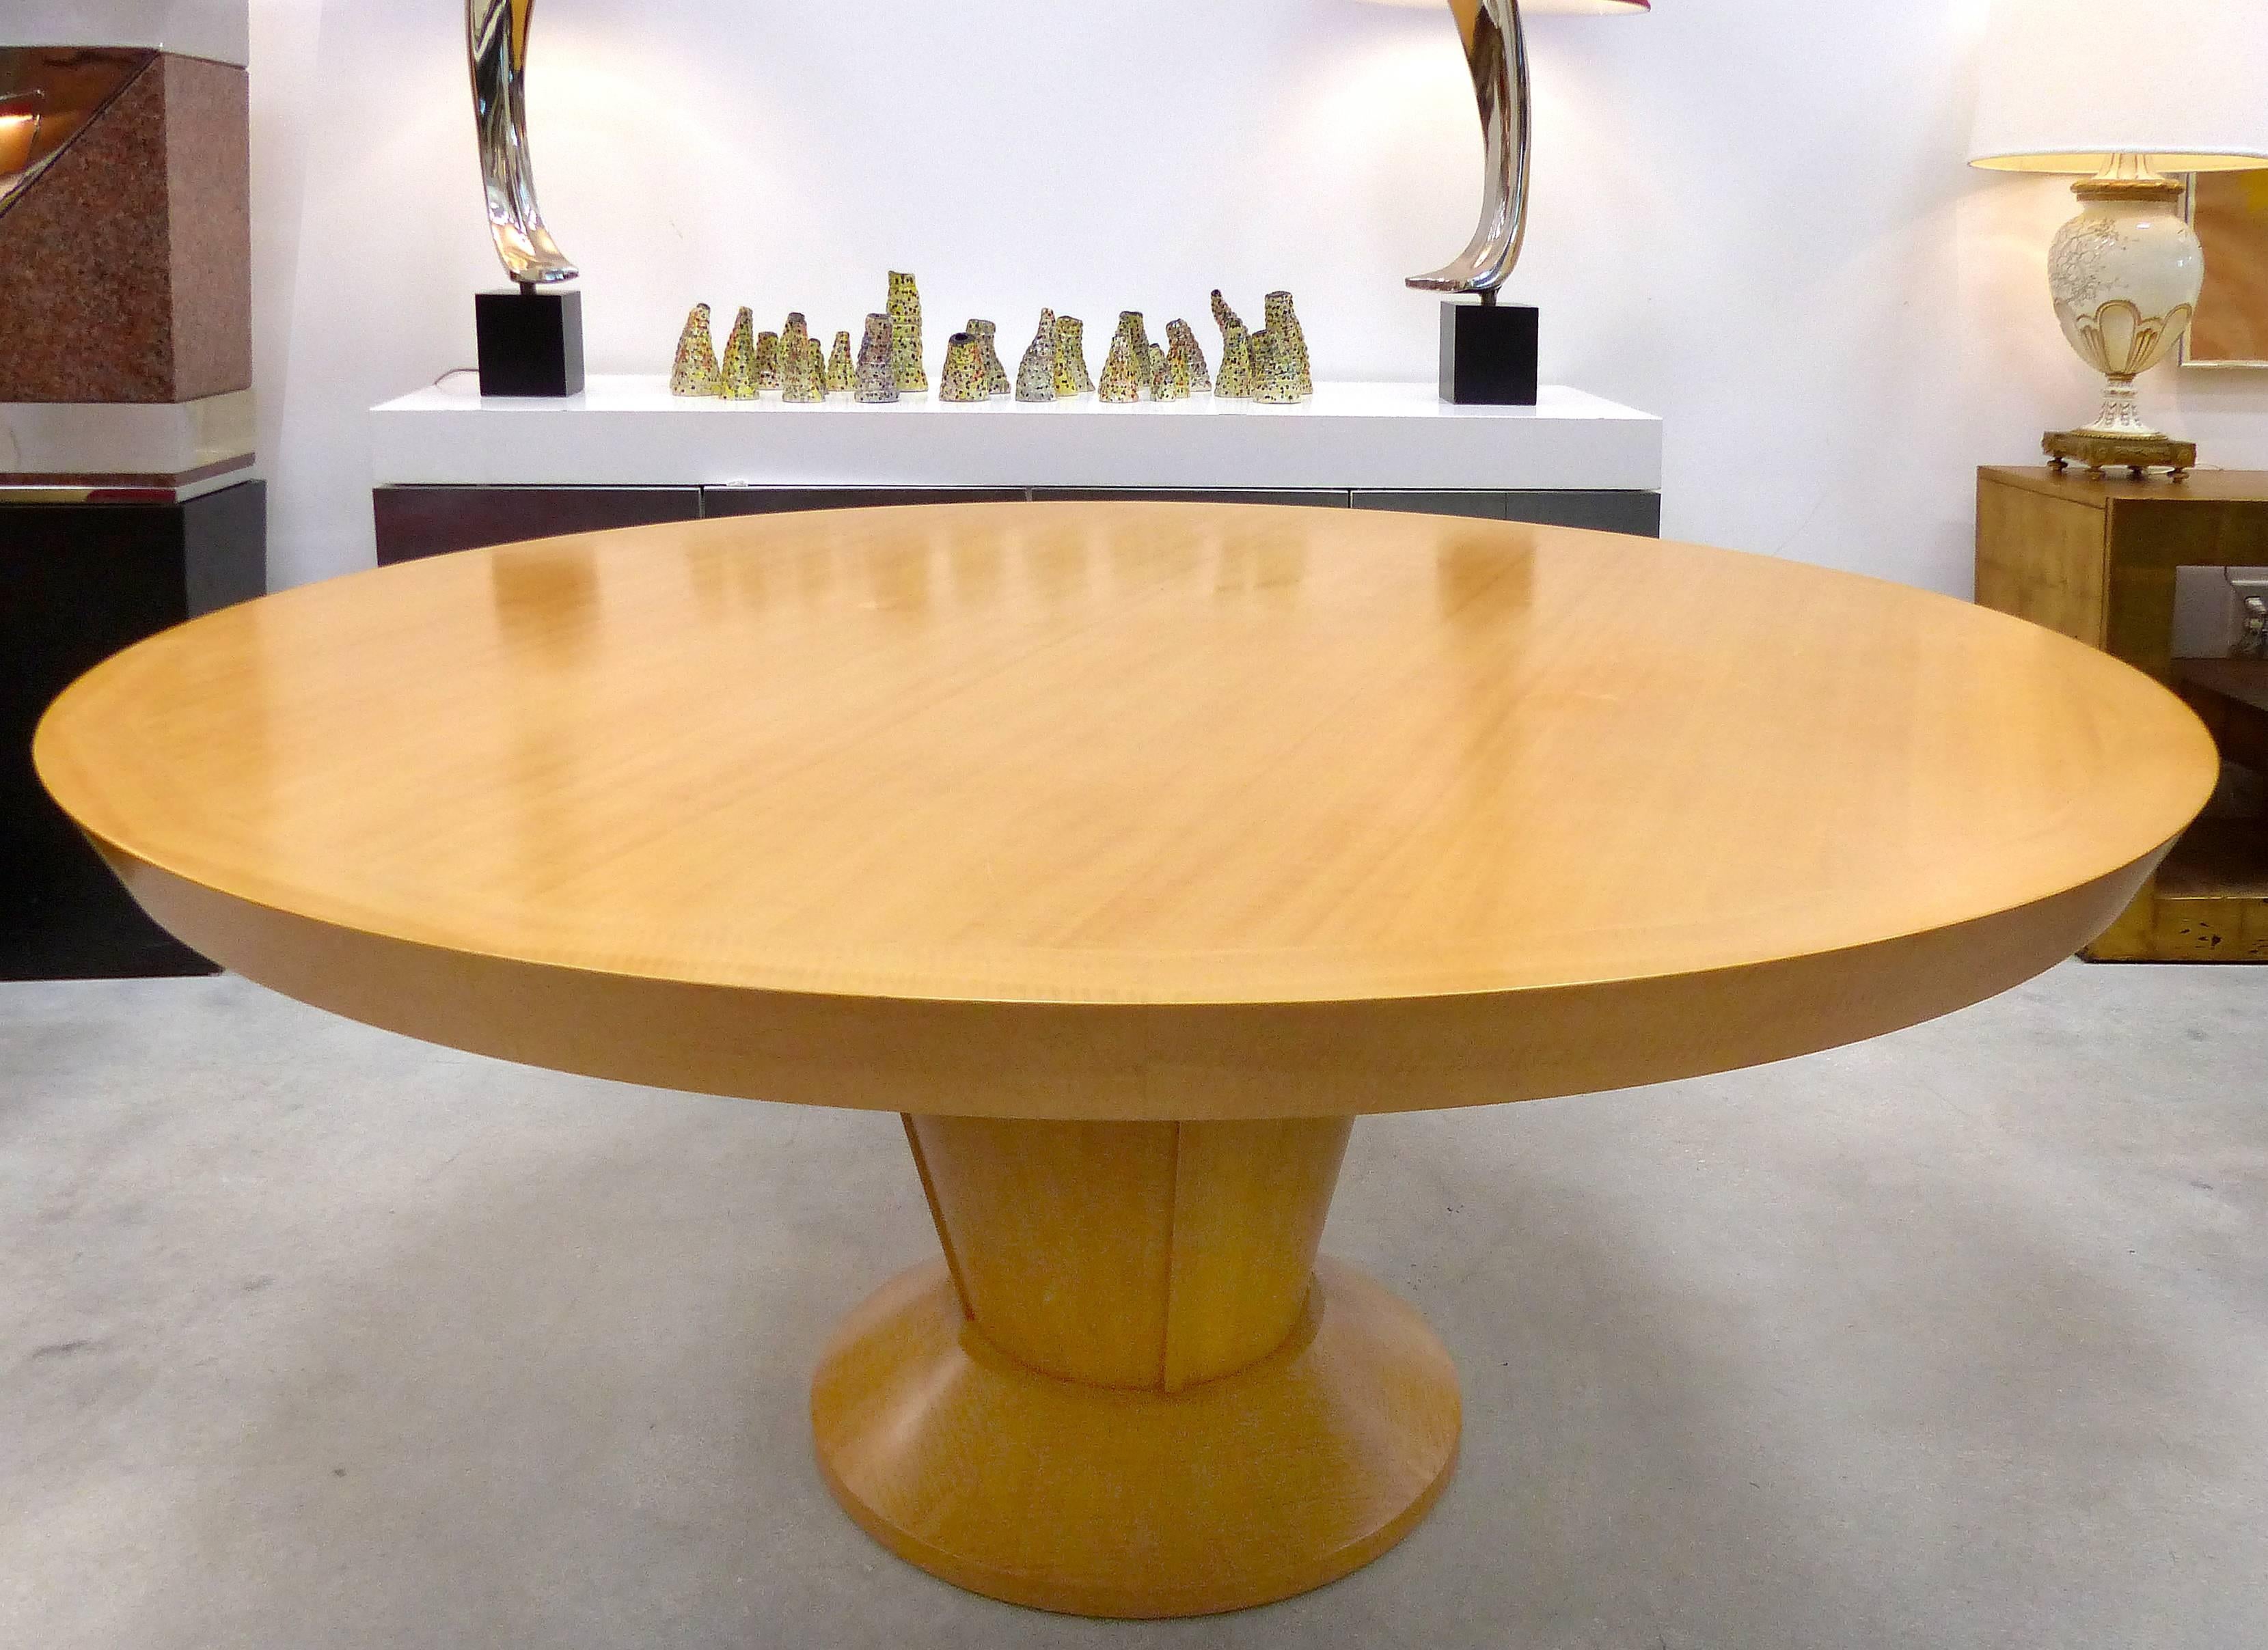 Offered for sale is a sleek large round single pedestal dining table of matched grain blond maple attributed to Dakota Jackson. Unsigned but marked with impressed model numbers. This could be installed as a conference table.